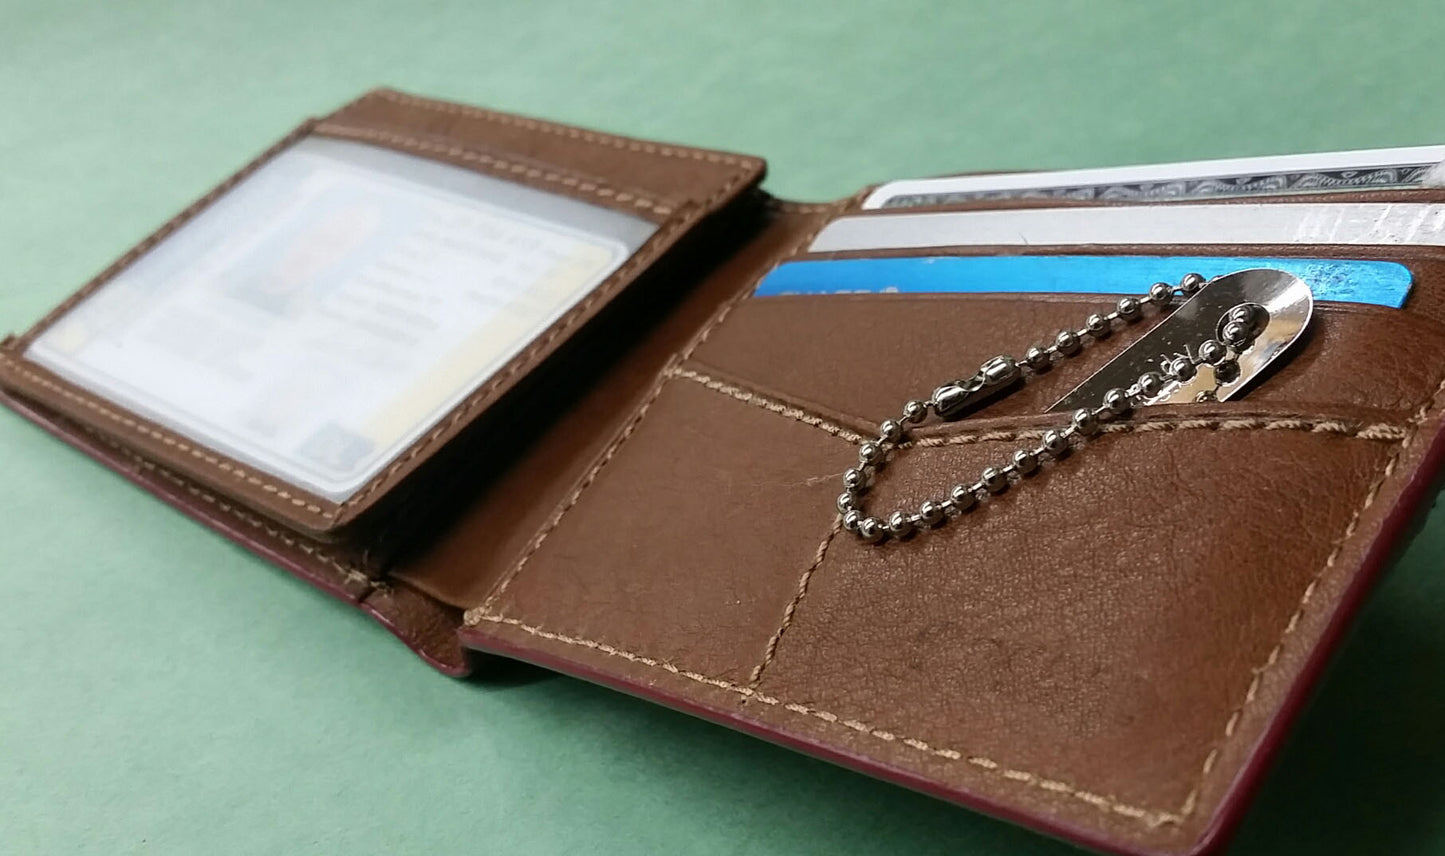 ProTick Remedy shown in wallet